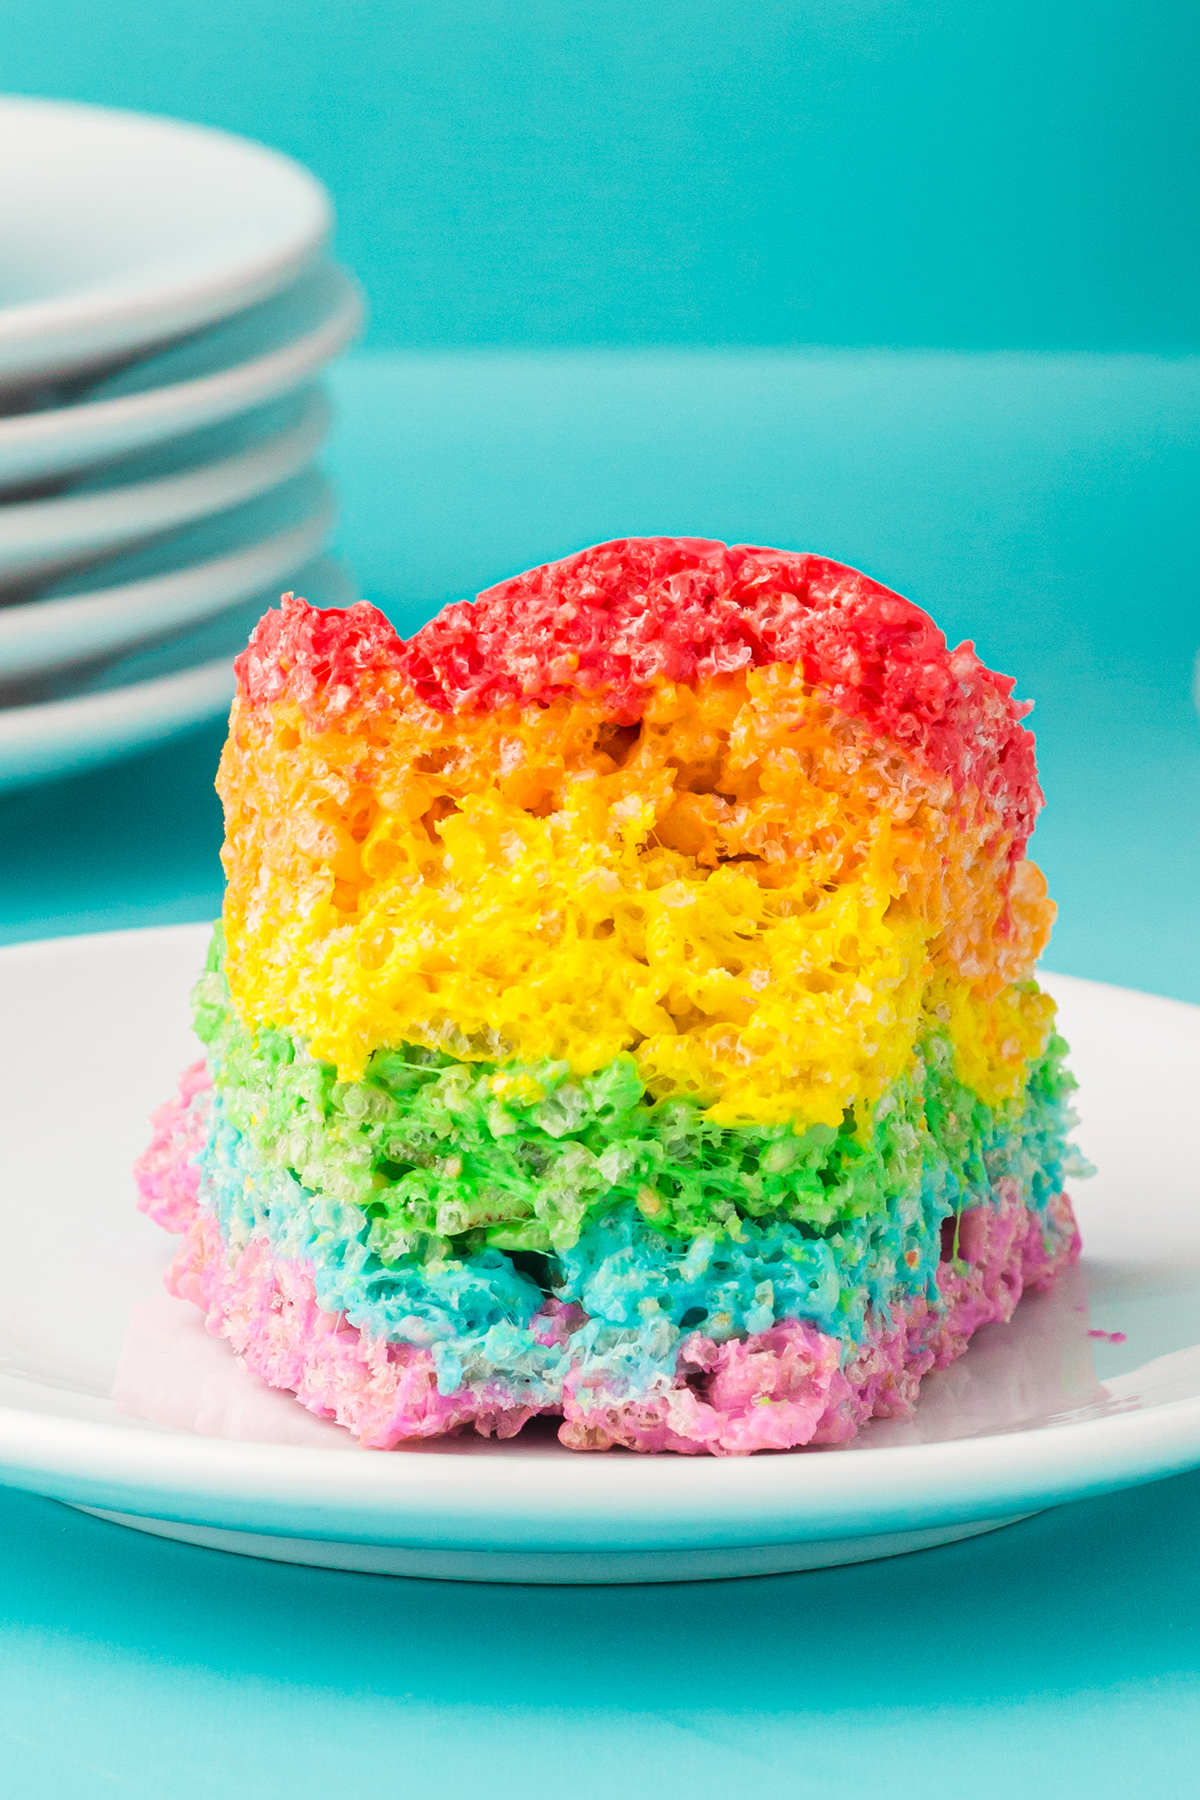 up close view of slice of rainbow cake using rice cereal